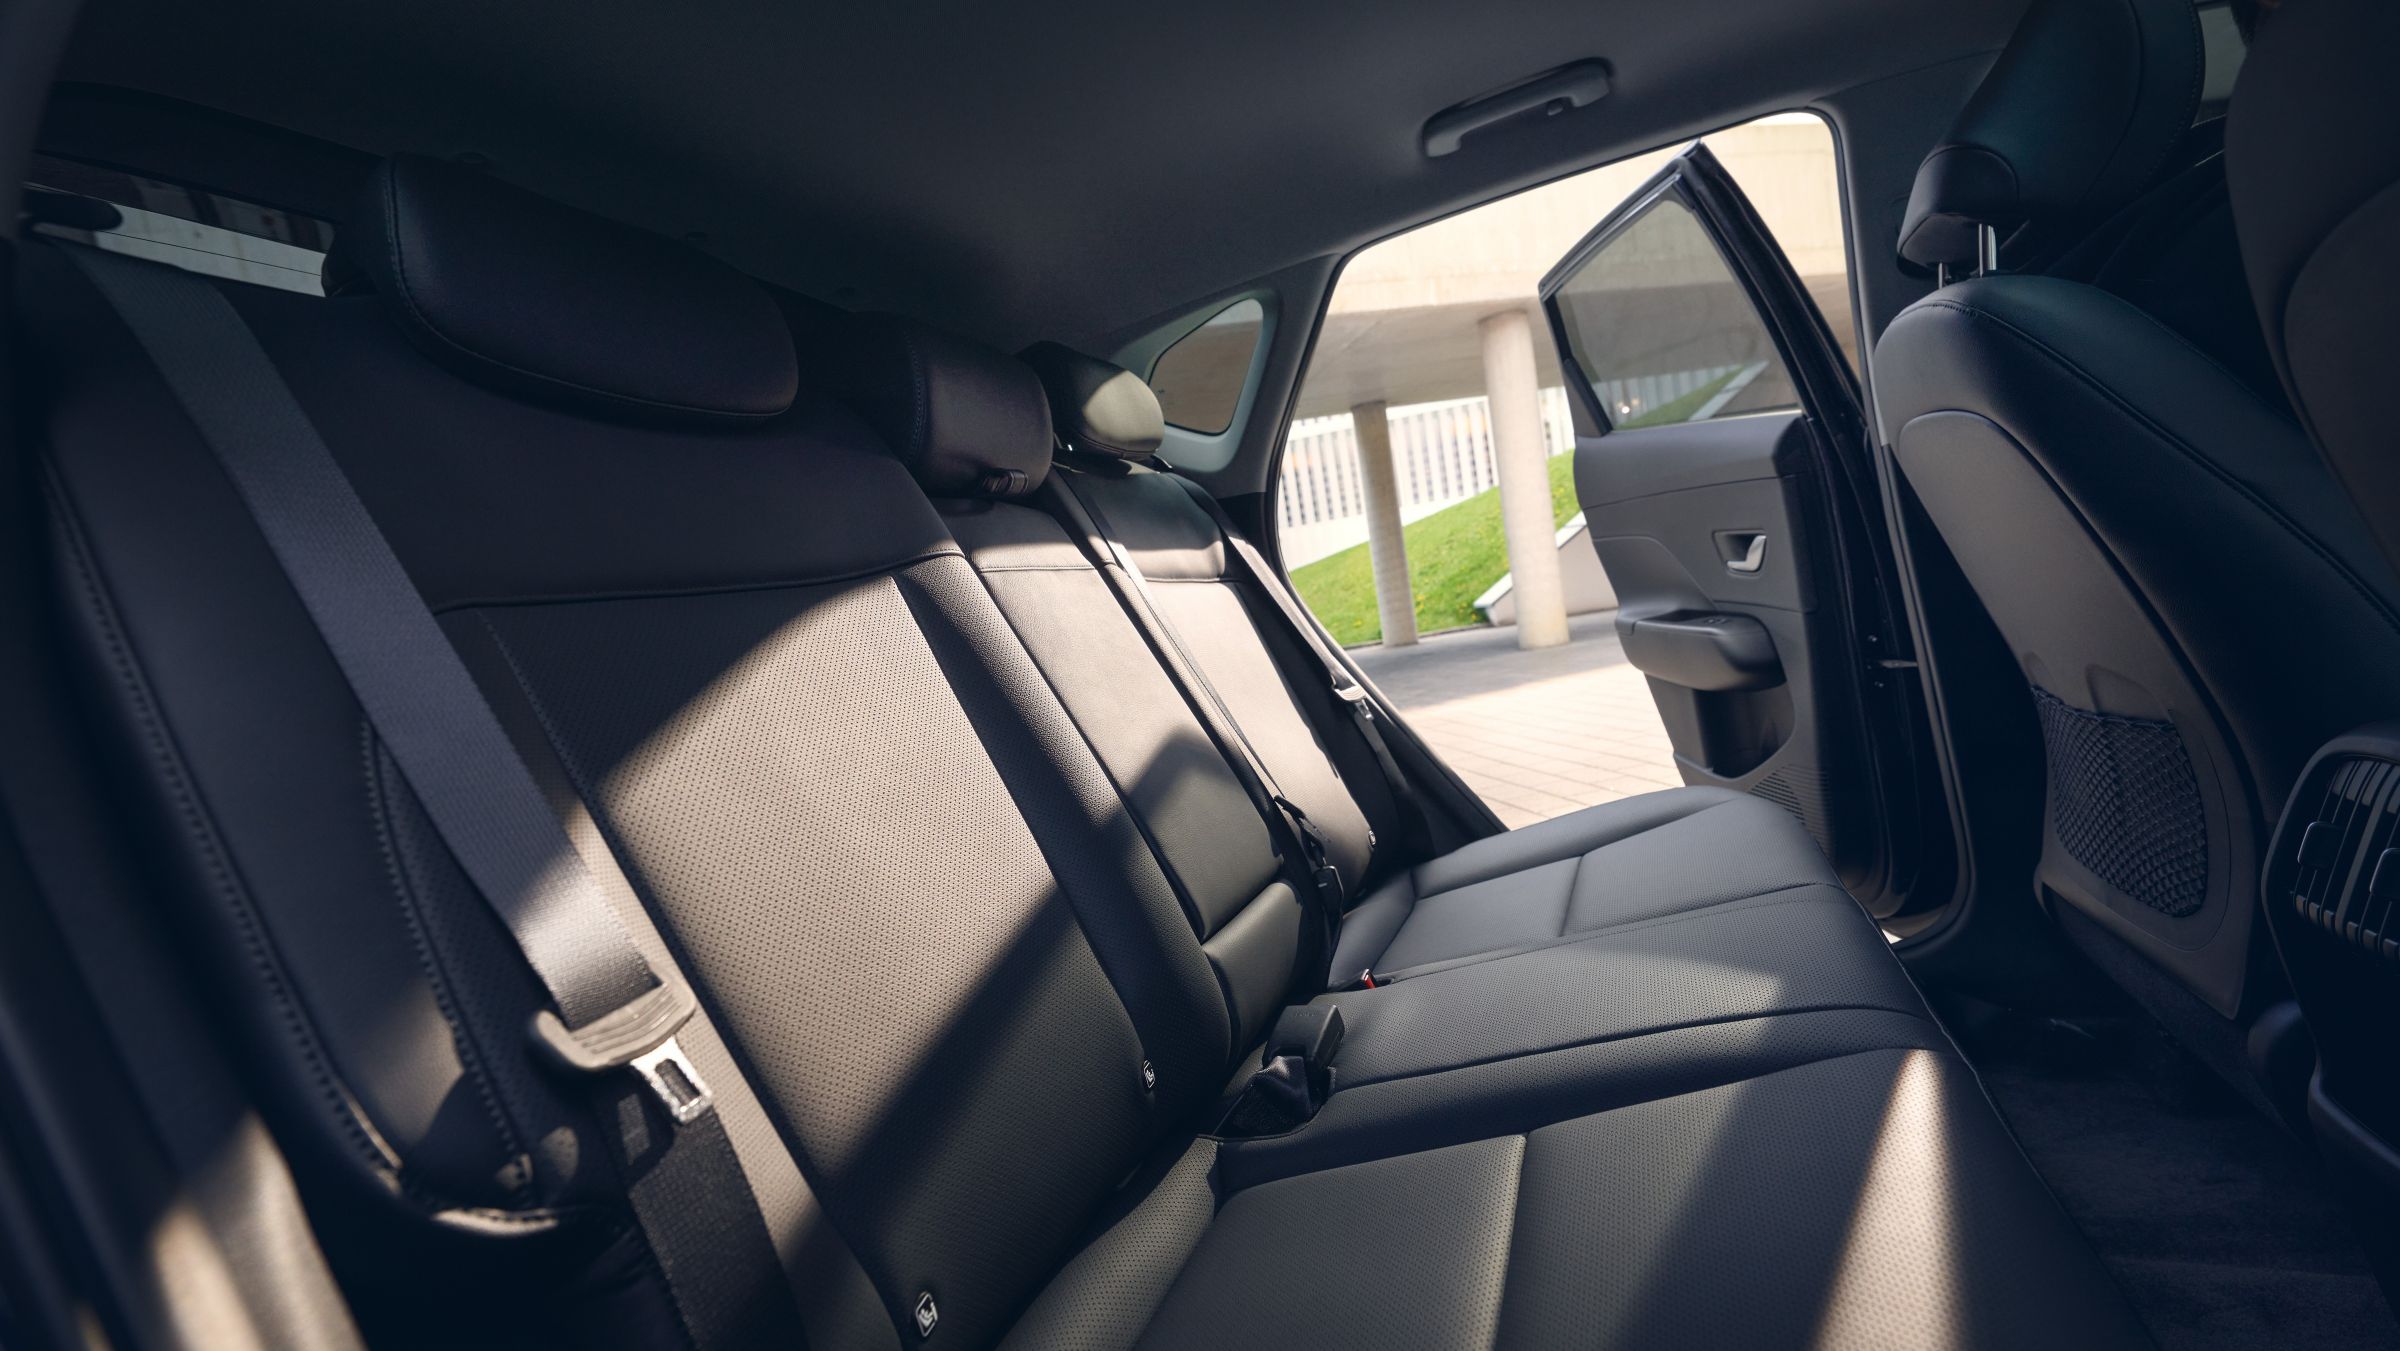 Inside view of the Hyundai KONA SUV with its heated and ventilated seats.